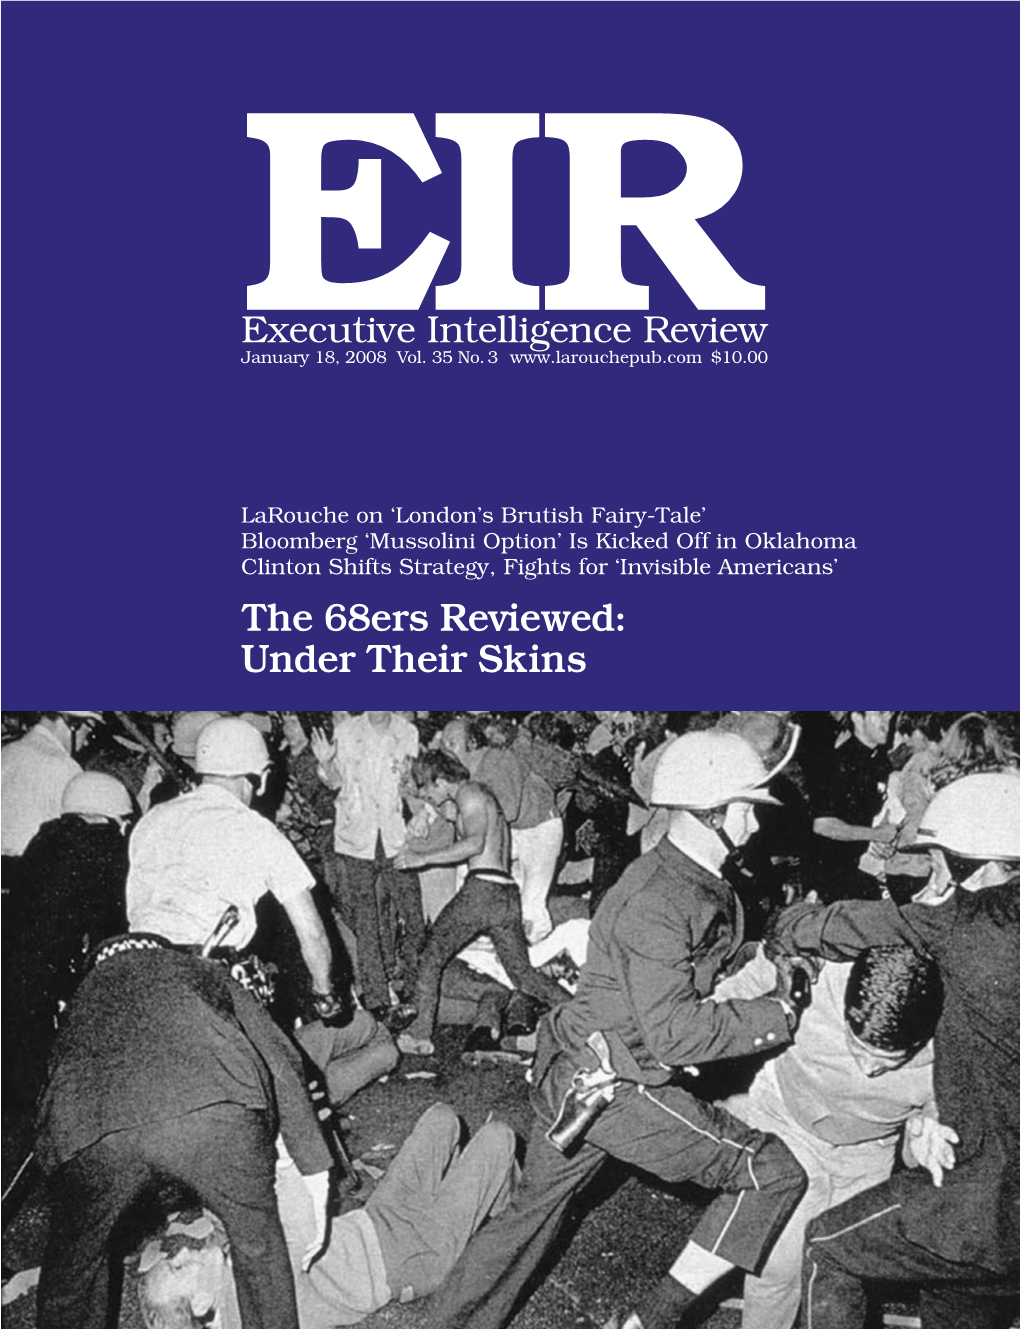 Executive Intelligence Review, Volume 35, Number 3, January 18